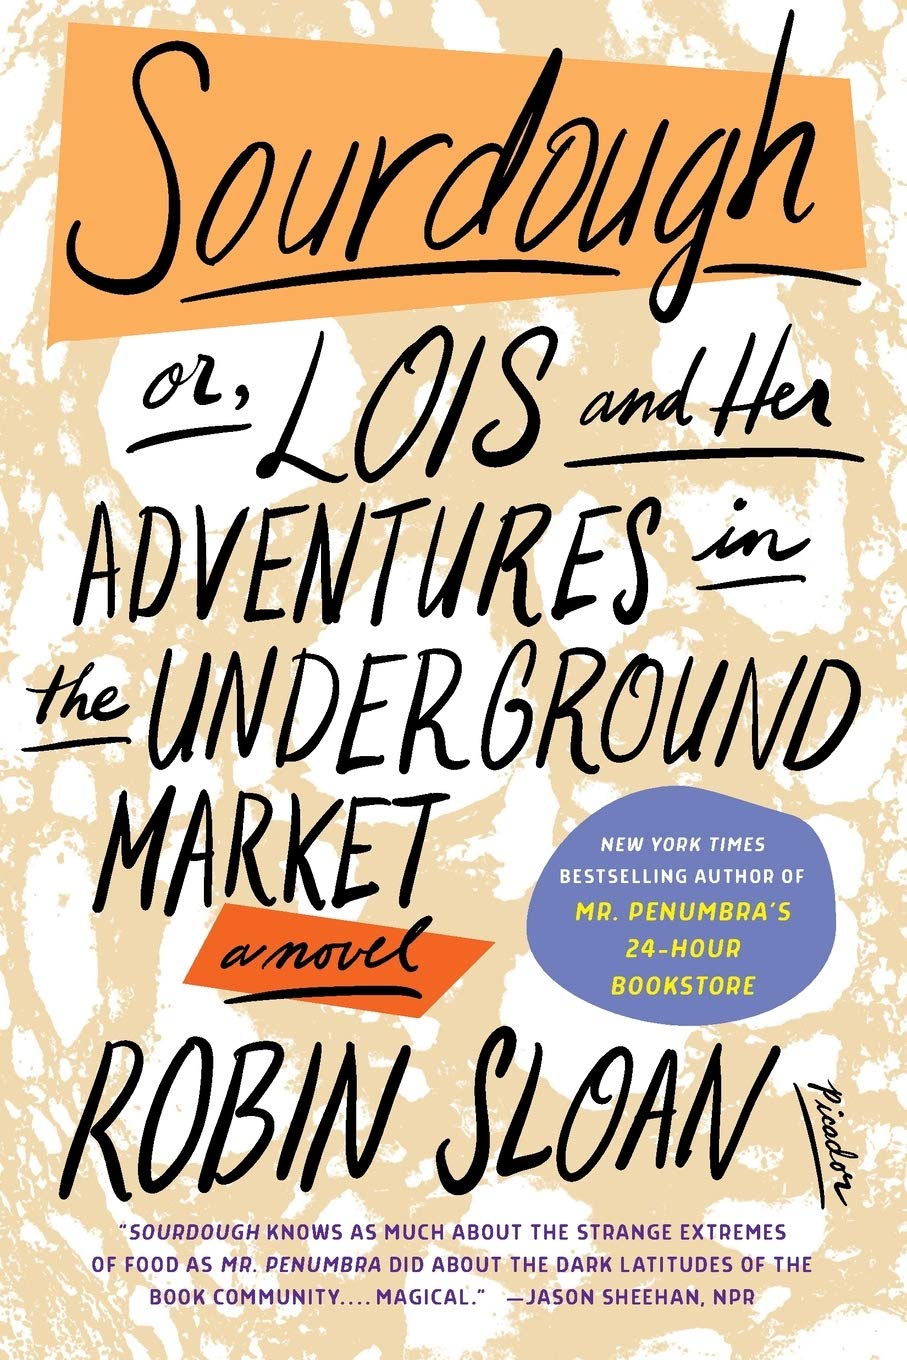 Paperback cover of Sourdough or, Lois and Her Adventures in the Underground Market by Robin Sloan.